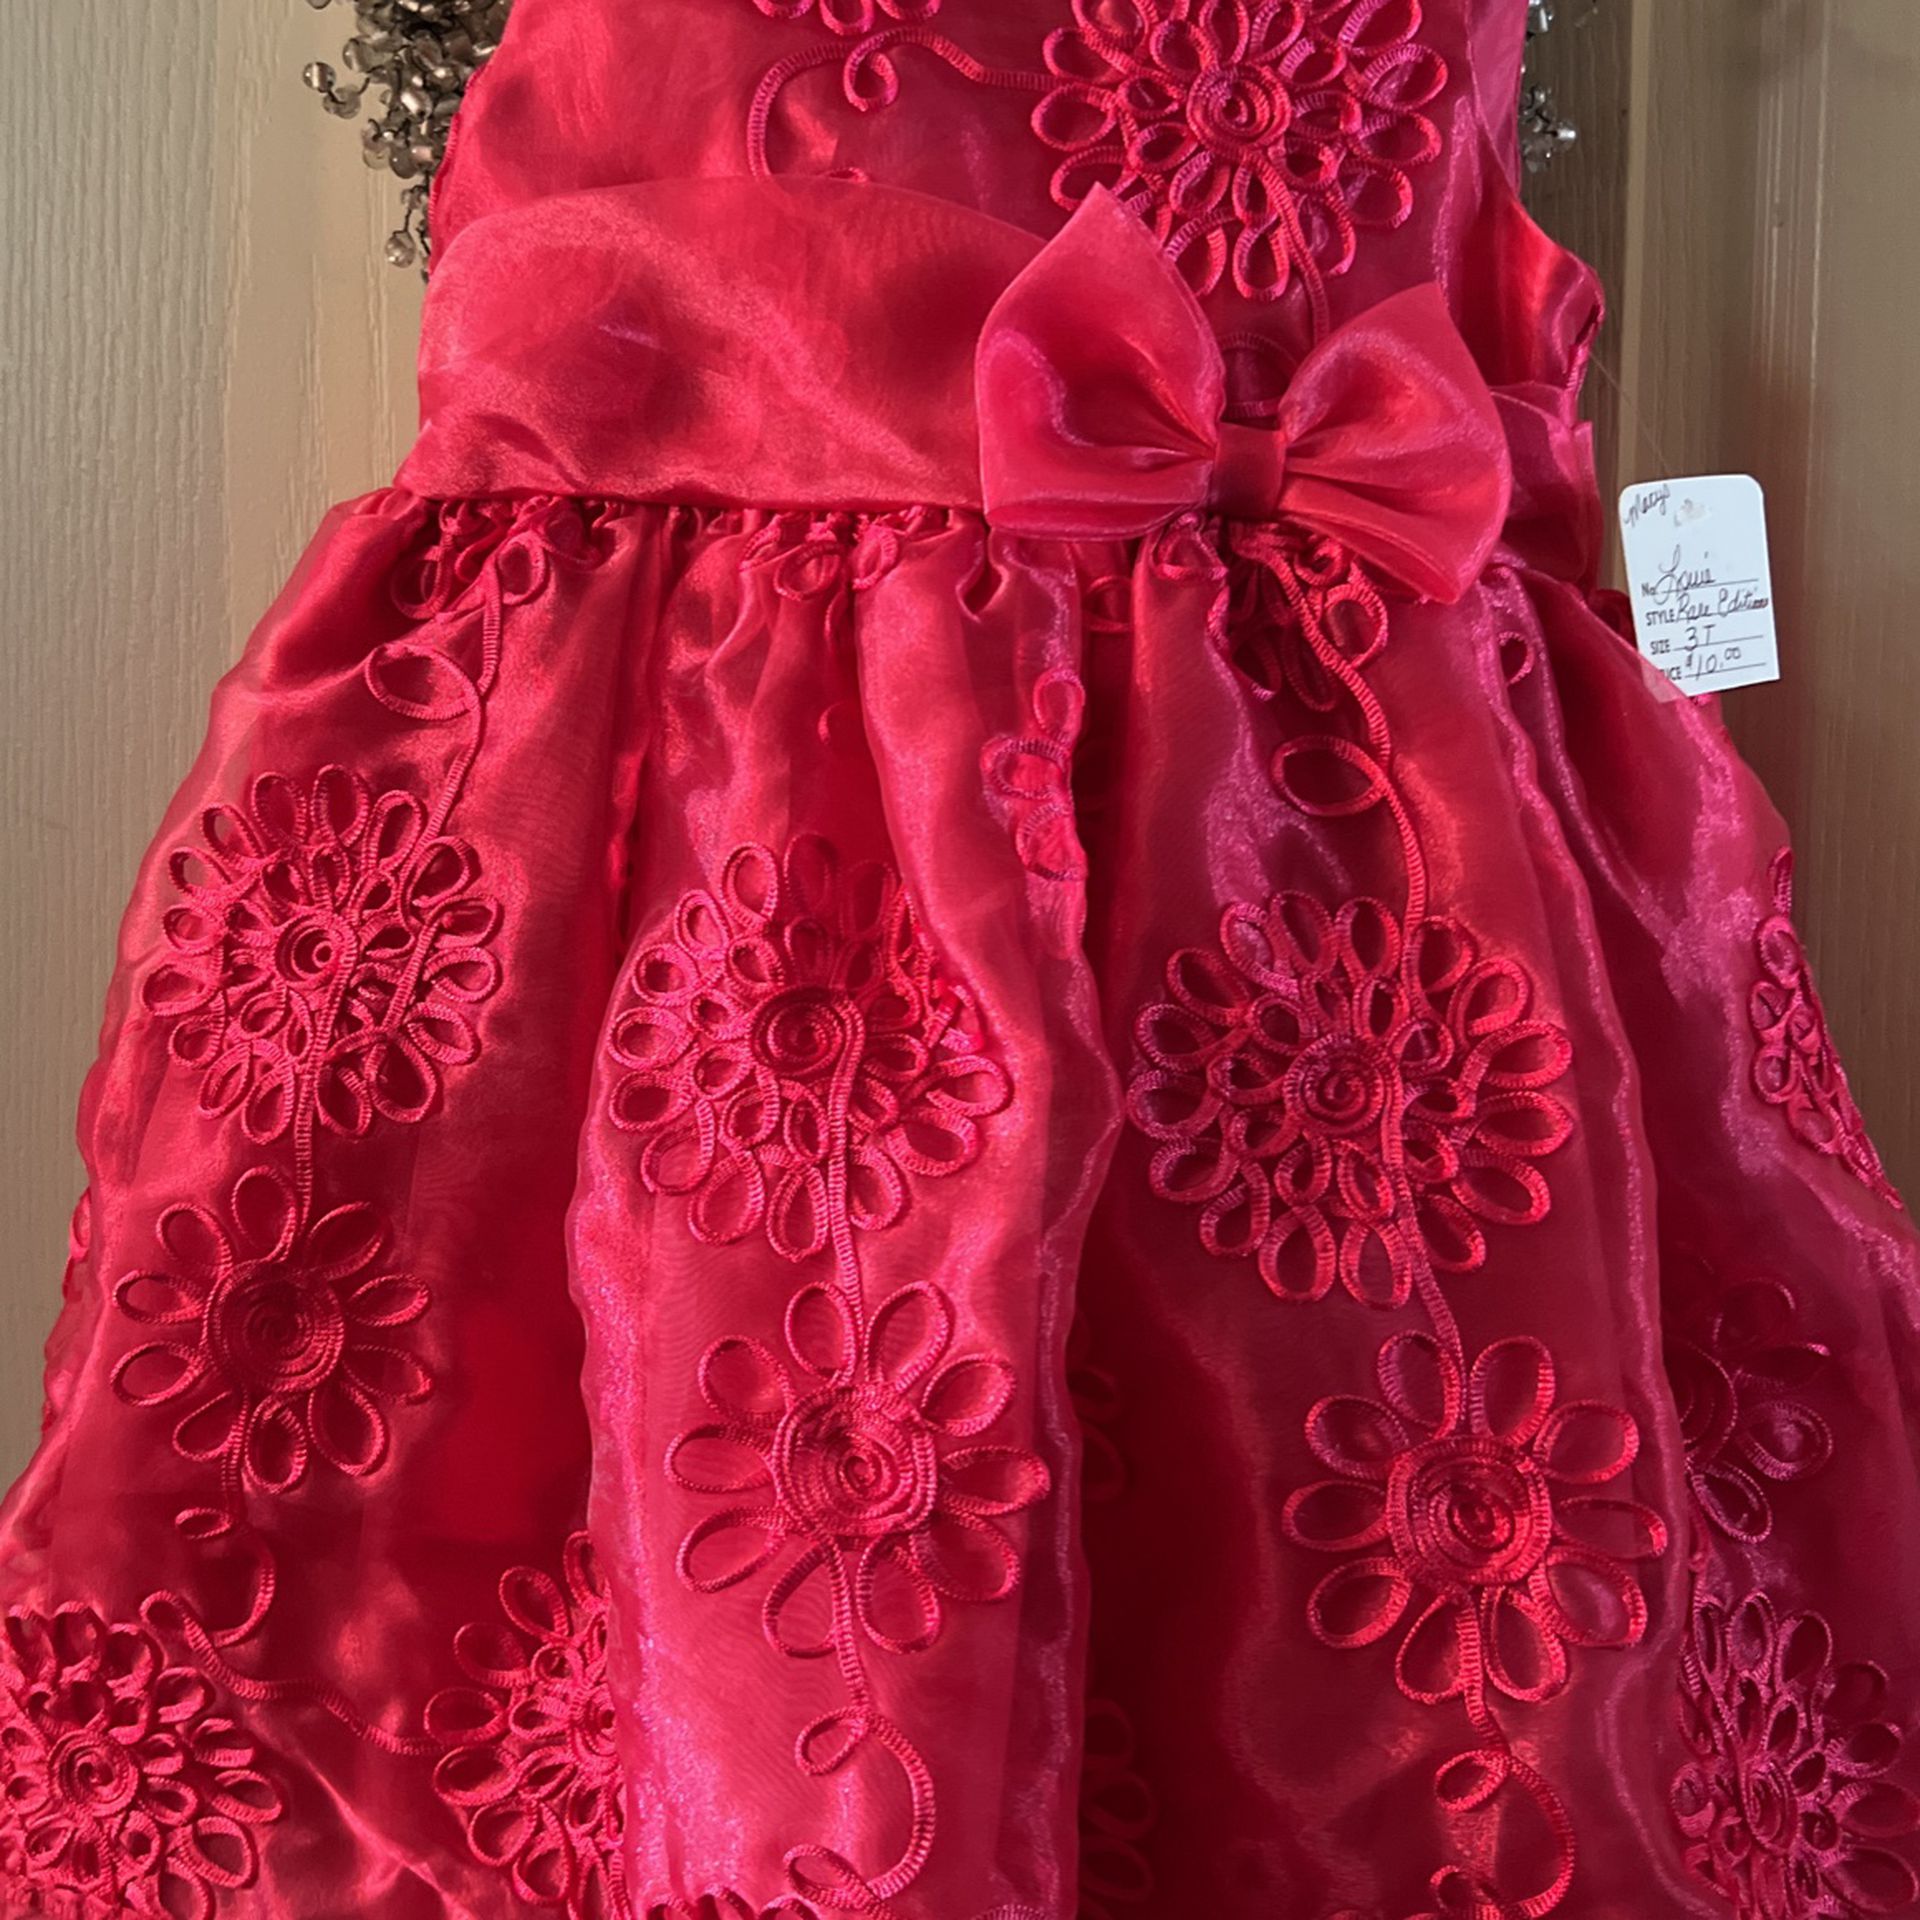 2-different size Rare Additions, Girls Dresses -3T size 5T purchased from Macy’s